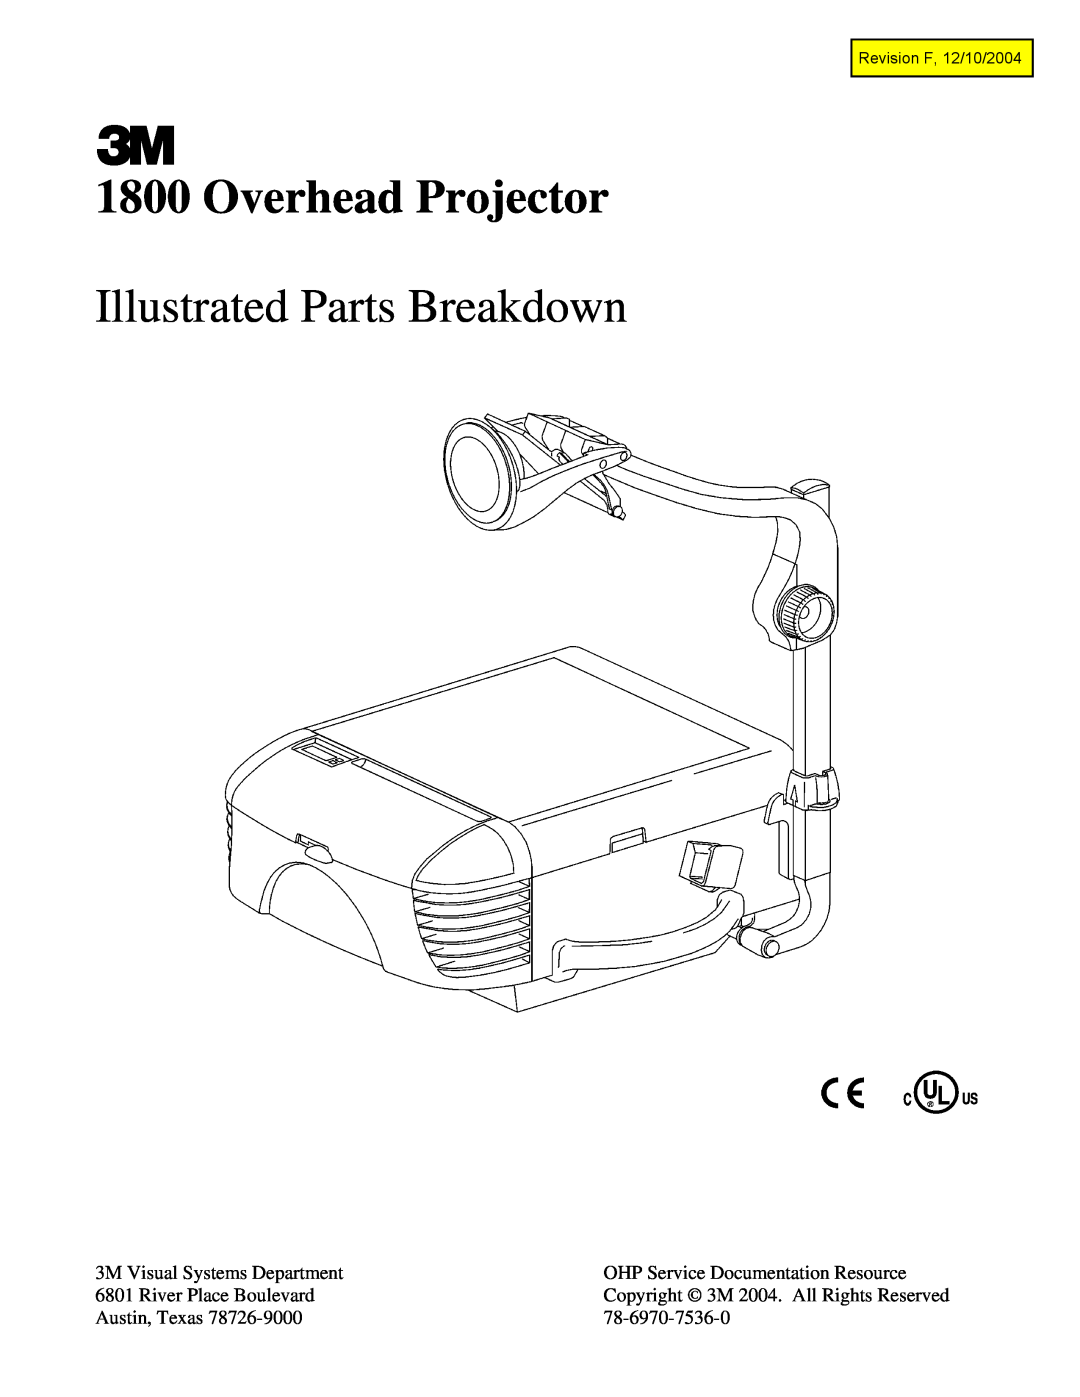 3M Overhead Projector, 1800 manual Illustrated Parts Breakdown 